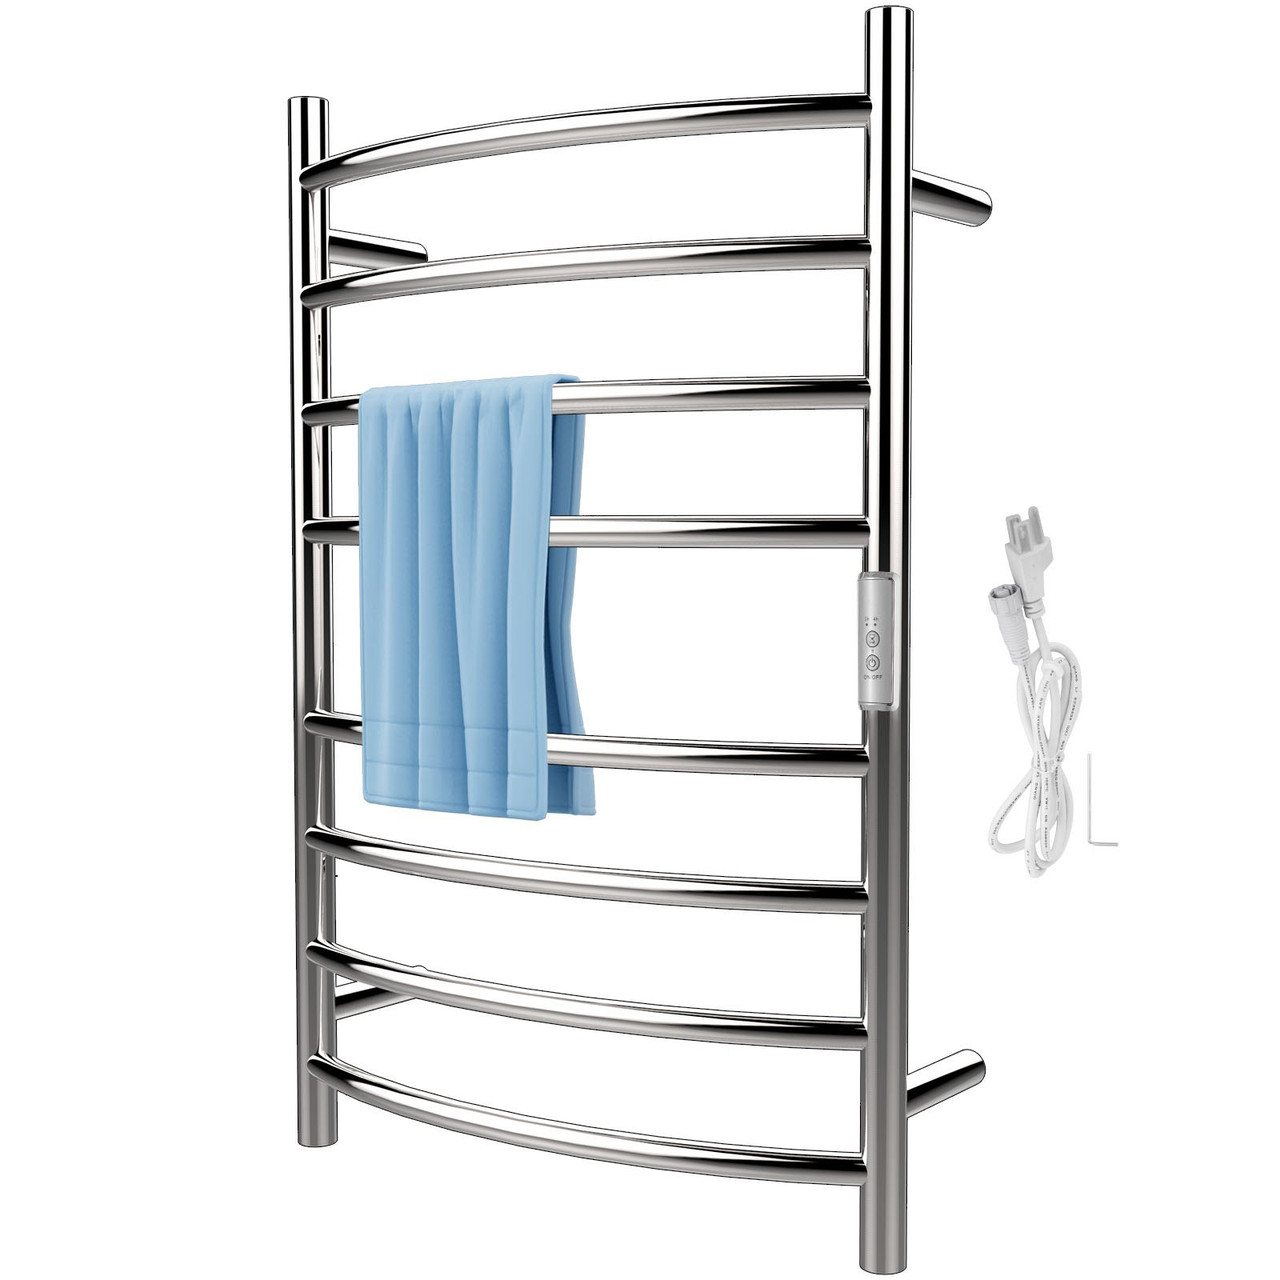 Heated Towel Rack, 8 Bars Curved Design, Mirror Polished Stainless Steel Electric Towel Warmer with Built-in Timer, Wall-Mounted for Bathroom, Plug-in/Hardwired, UL Certificated, Silver